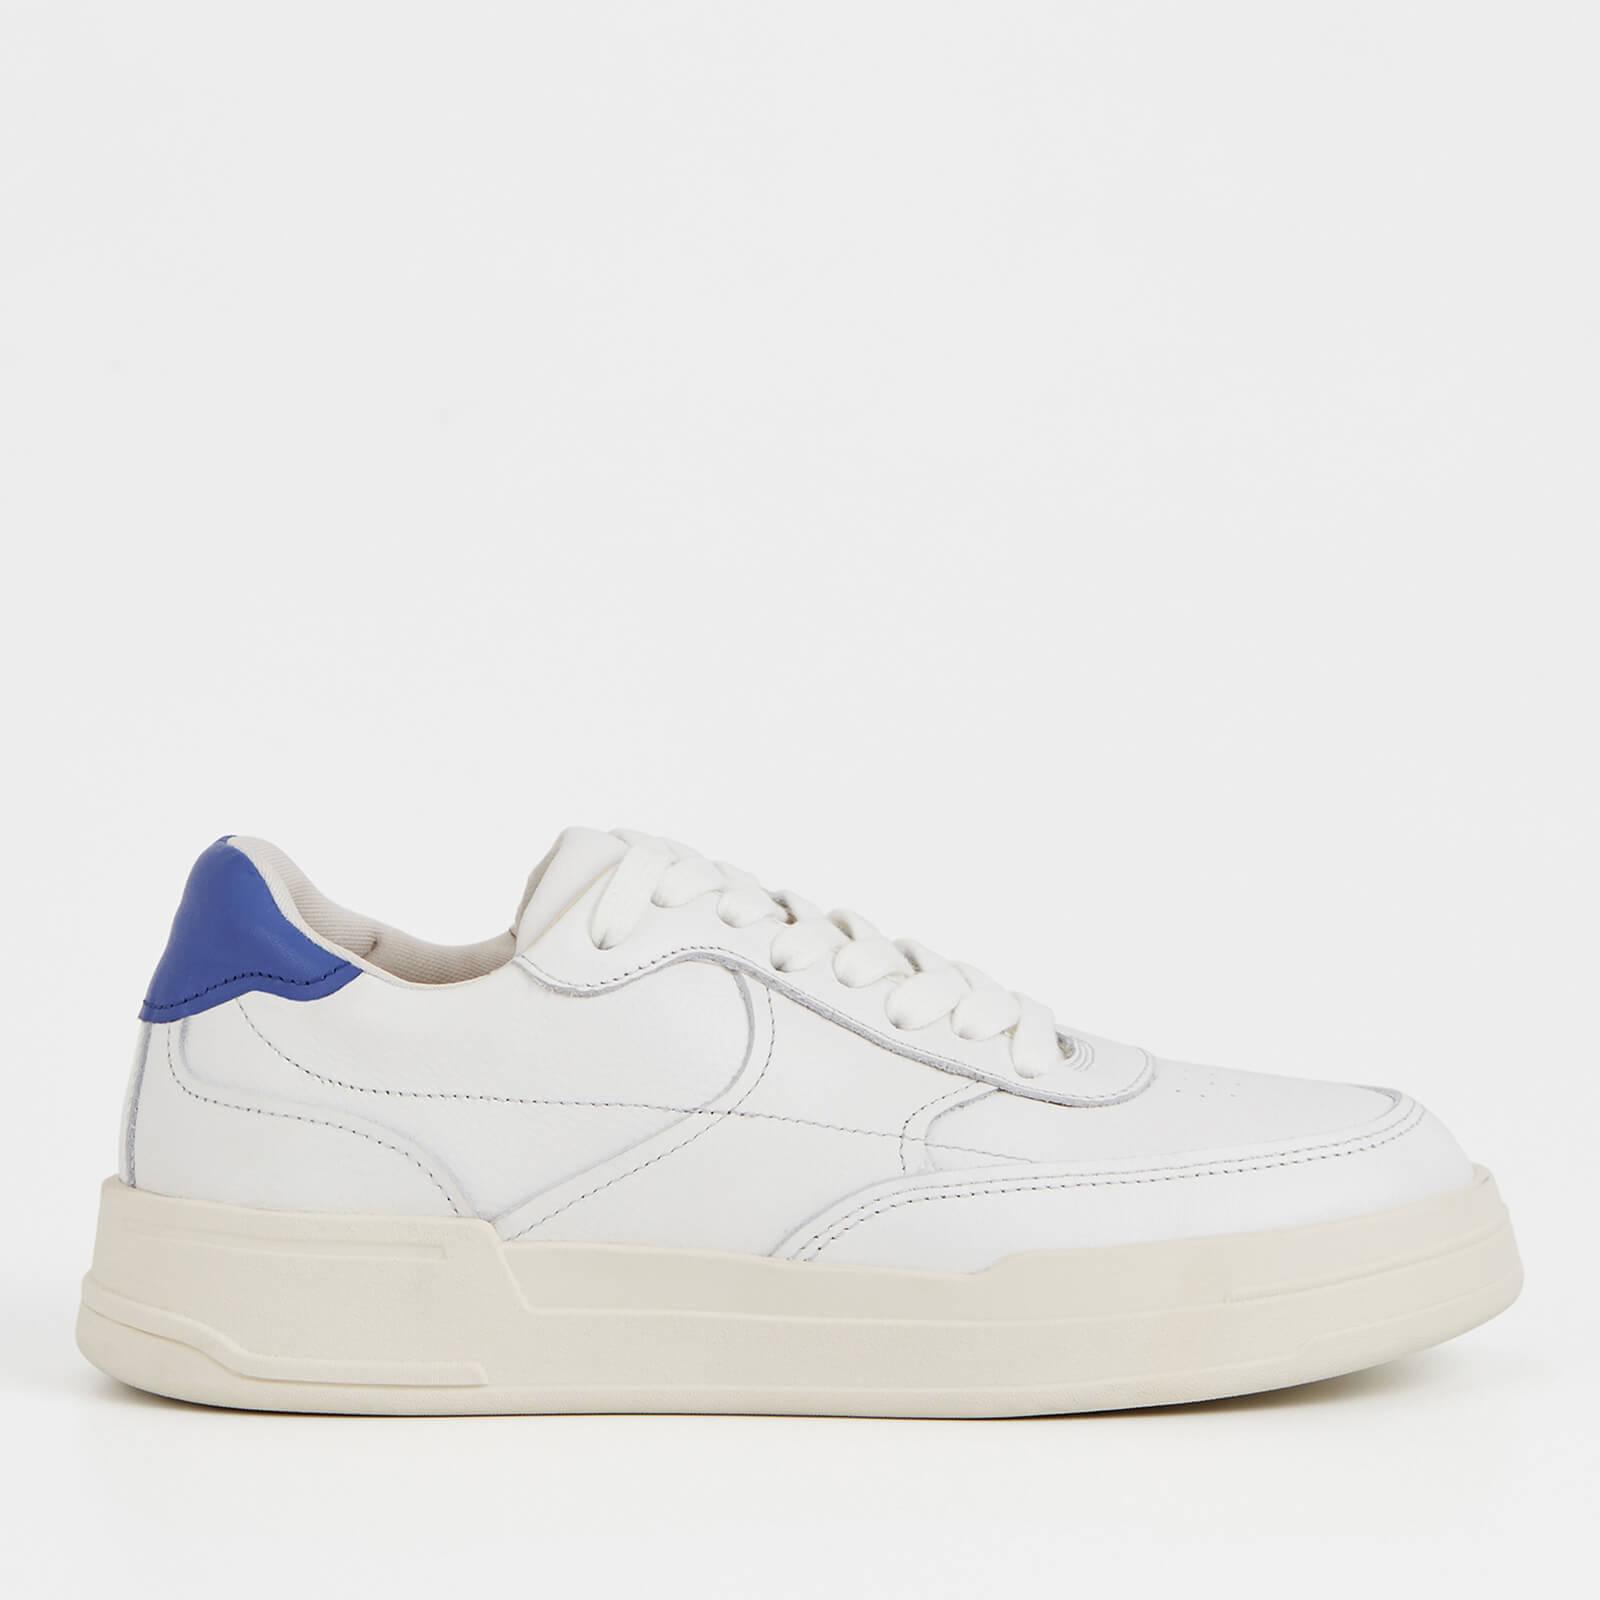 Vagabond Shoemakers Selena Leather Basket Trainers in White | Lyst